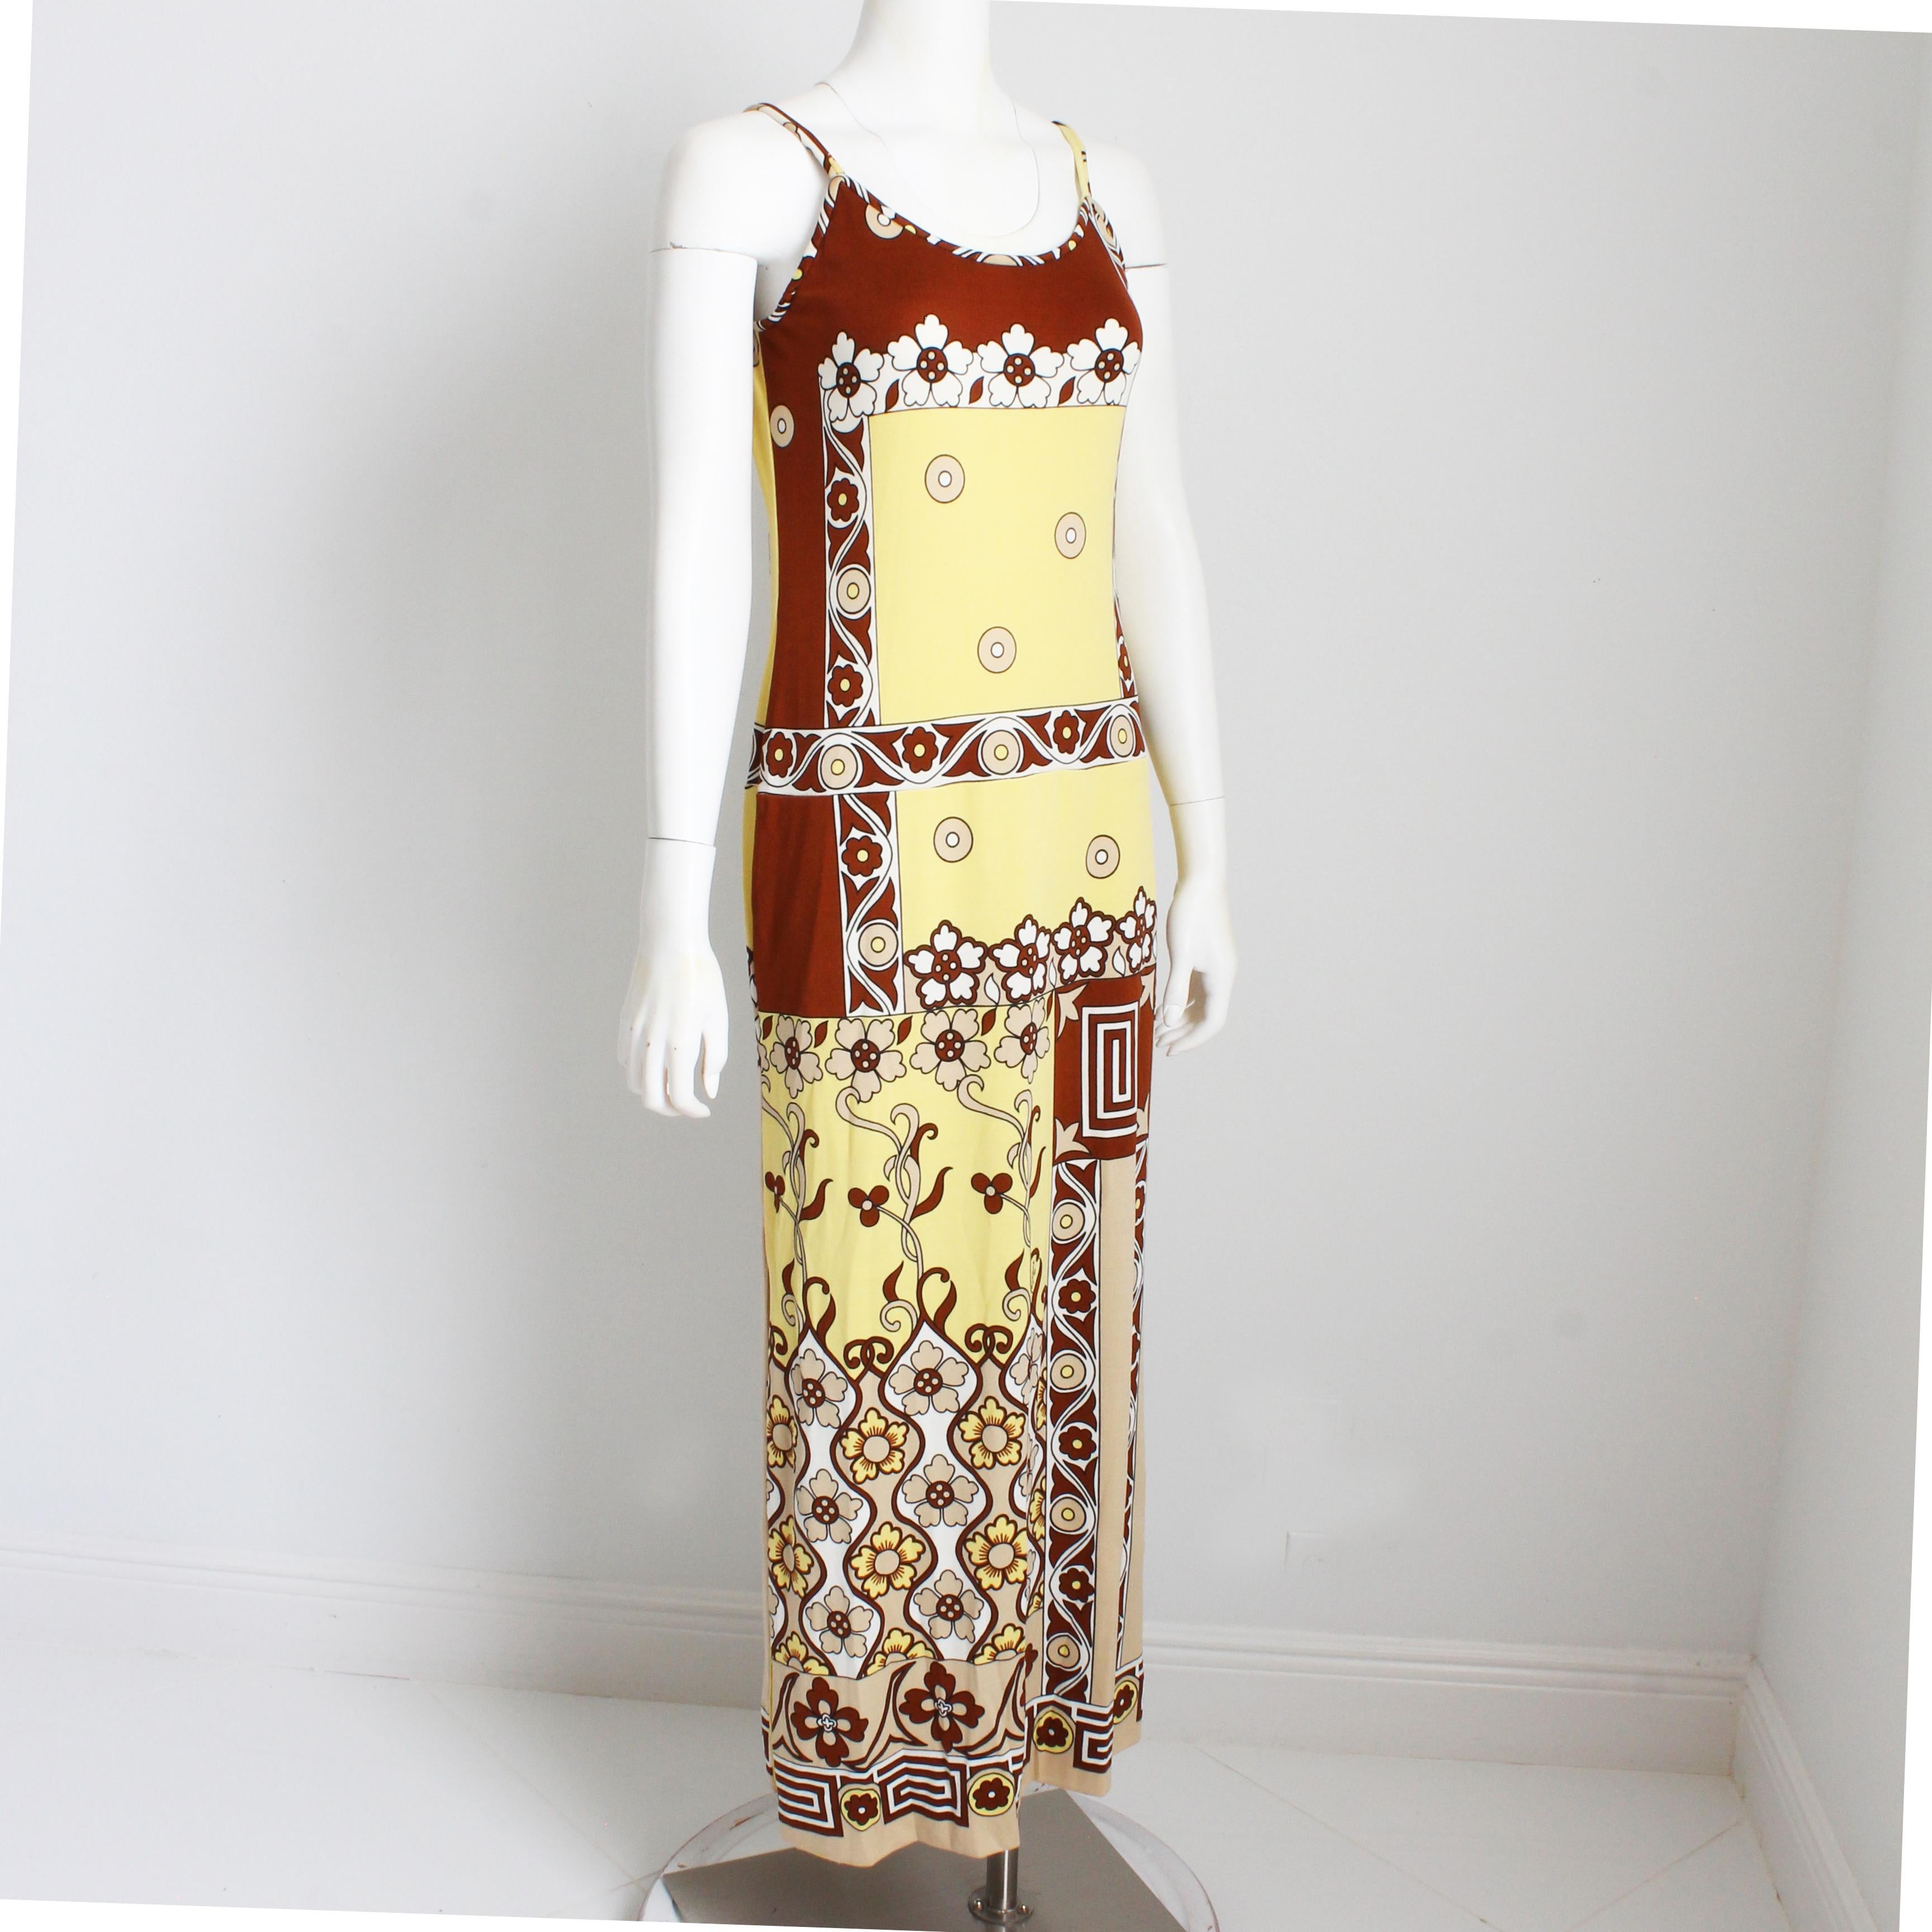 Vintage maxi dress, made by Paganne and designed by Gene Berk, most likely in the early 70s. Made from a poly/nylon blend jersey fabric, it features a bold abstract print in shades of brown, tan and yellow, skinny doubled shoulder straps and a chic